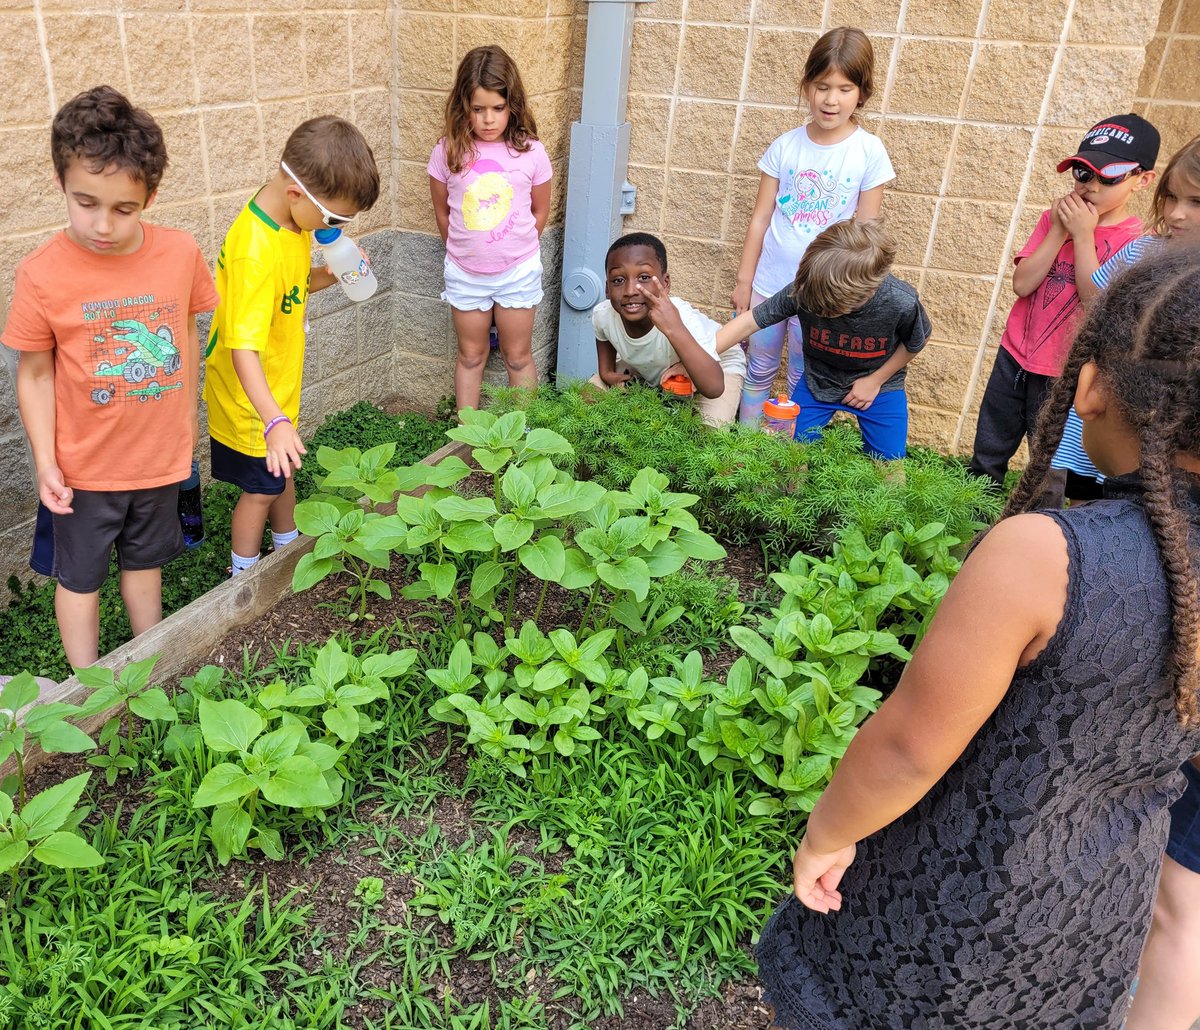 All our hard work is paying off. Our little seeds are growing strong at #afterschoolcare @HilburnAcademy ! #onthehil #schoolgarden #greenthumbs #Kindergarten #plants #flowers